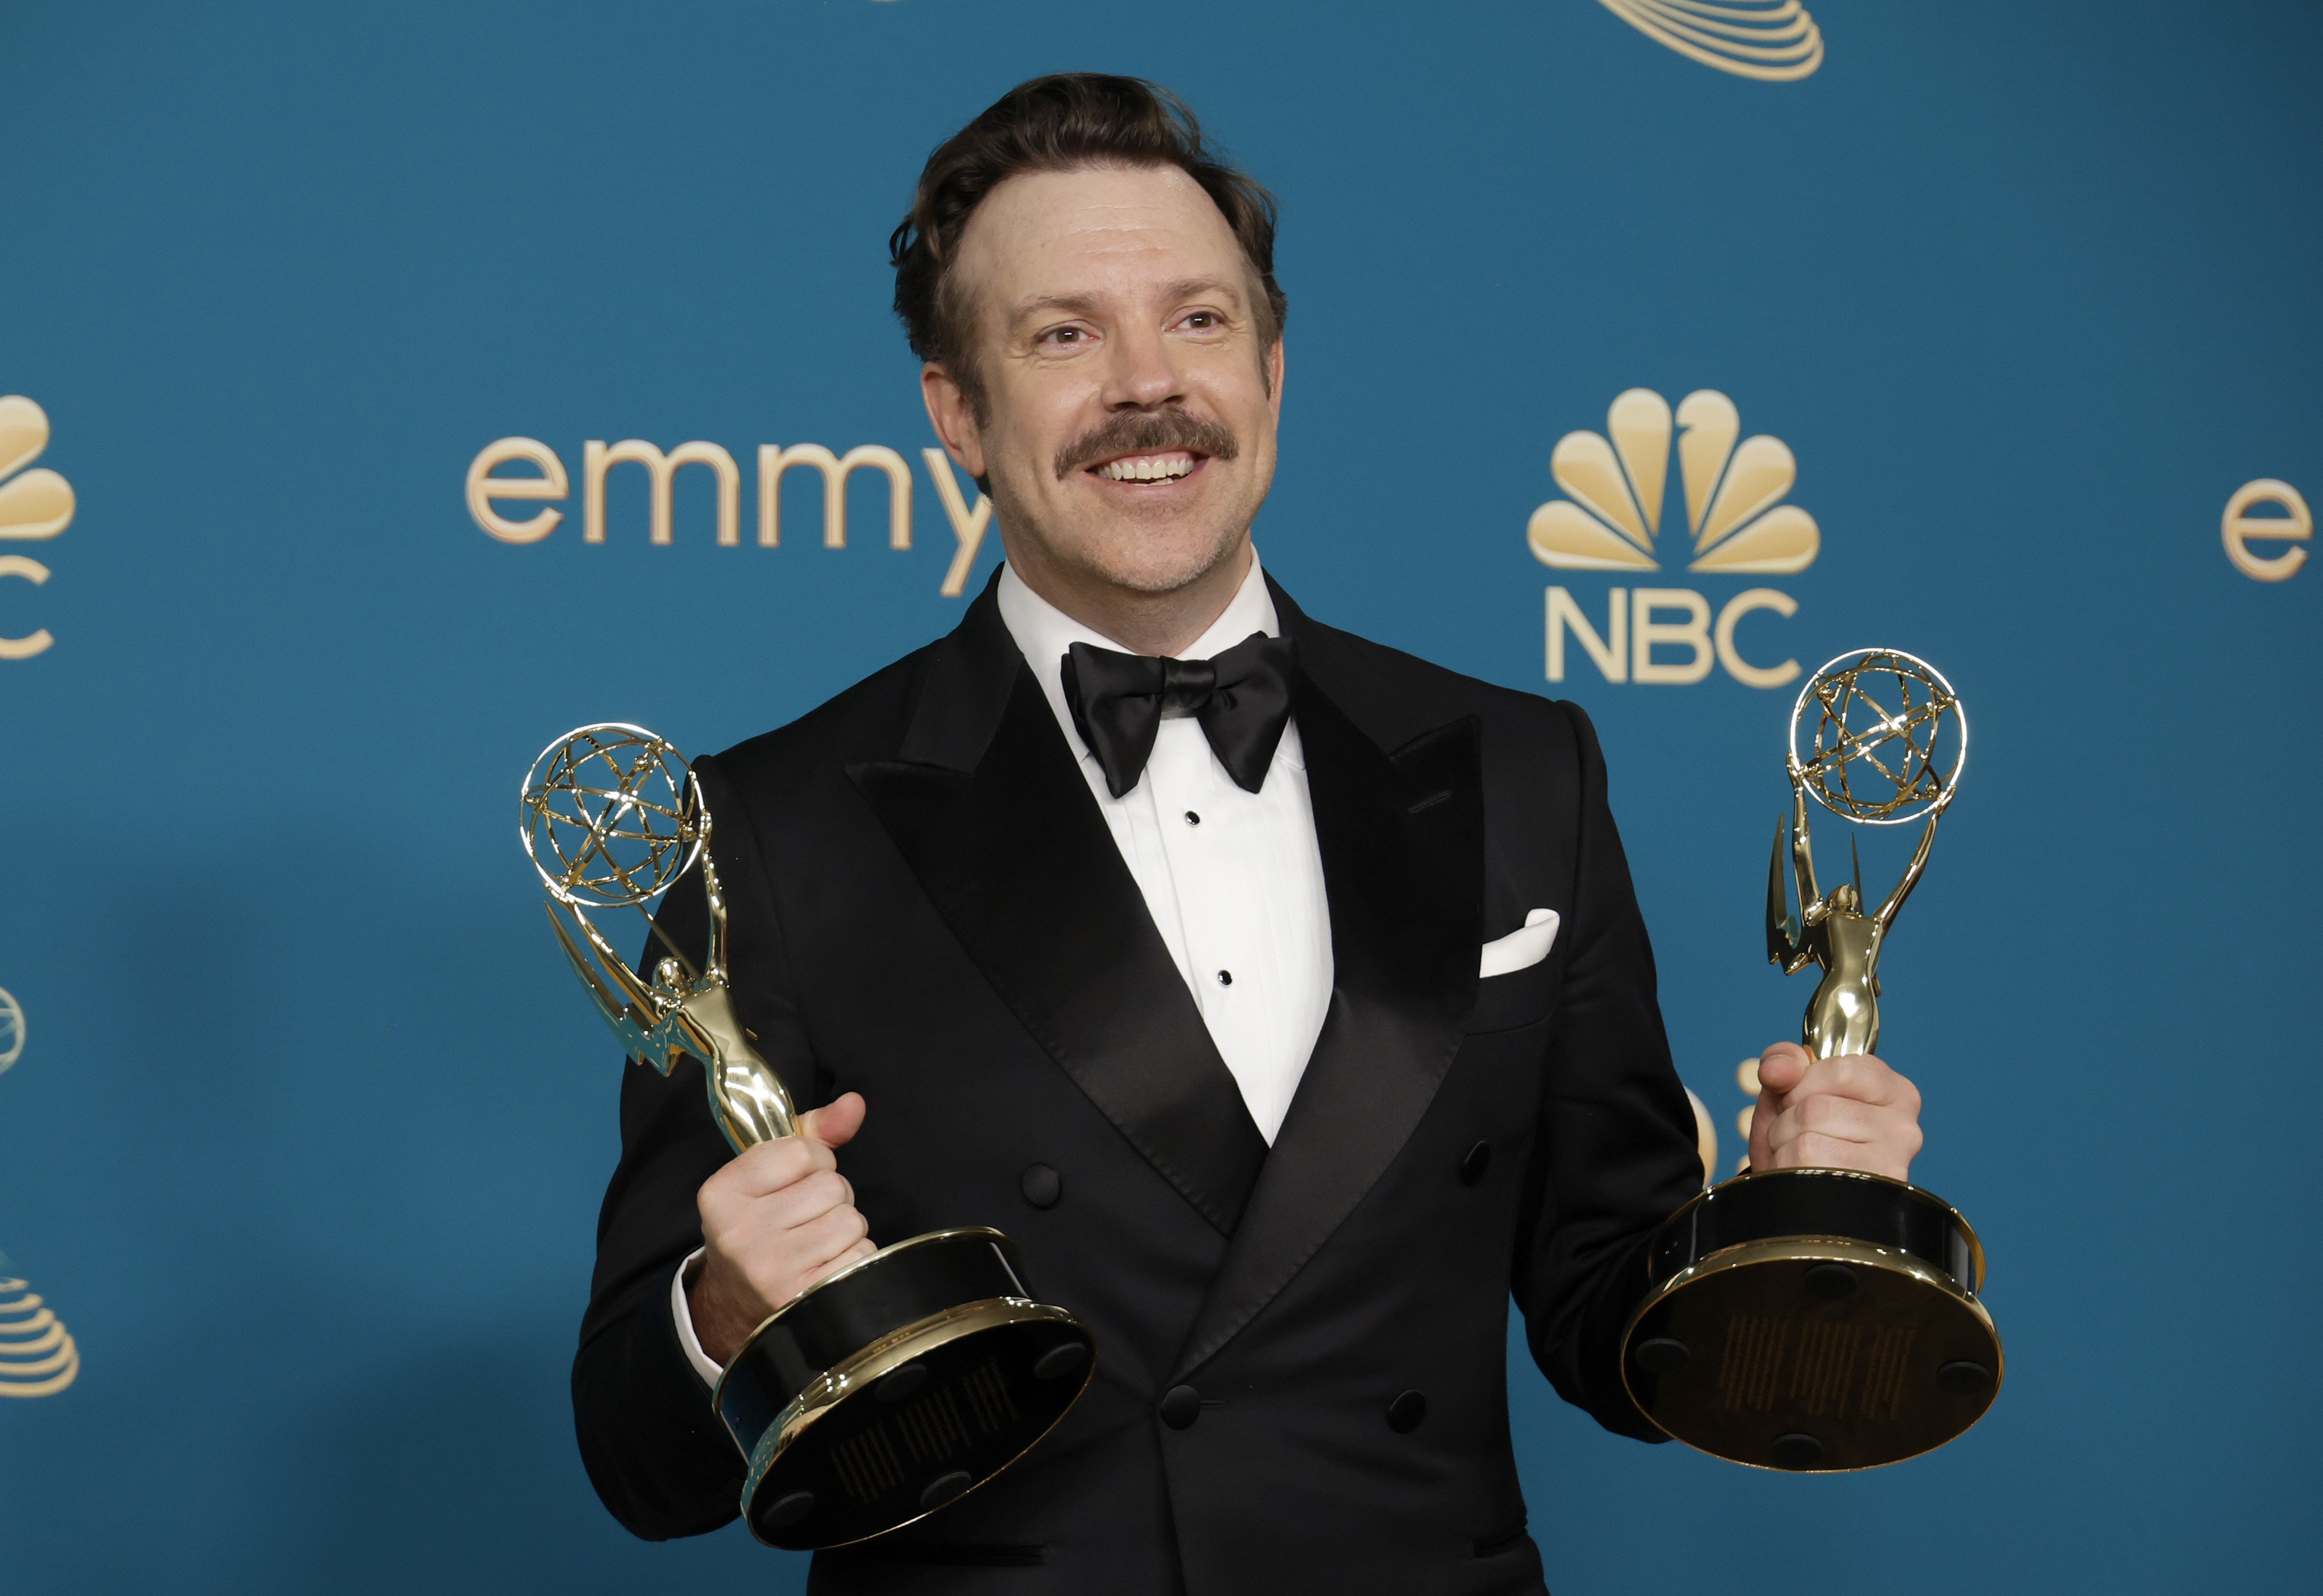 Jason Sudeikis at the 74th Primetime Emmys in Los Angeles on September 12, 2022 | Source: Getty Images